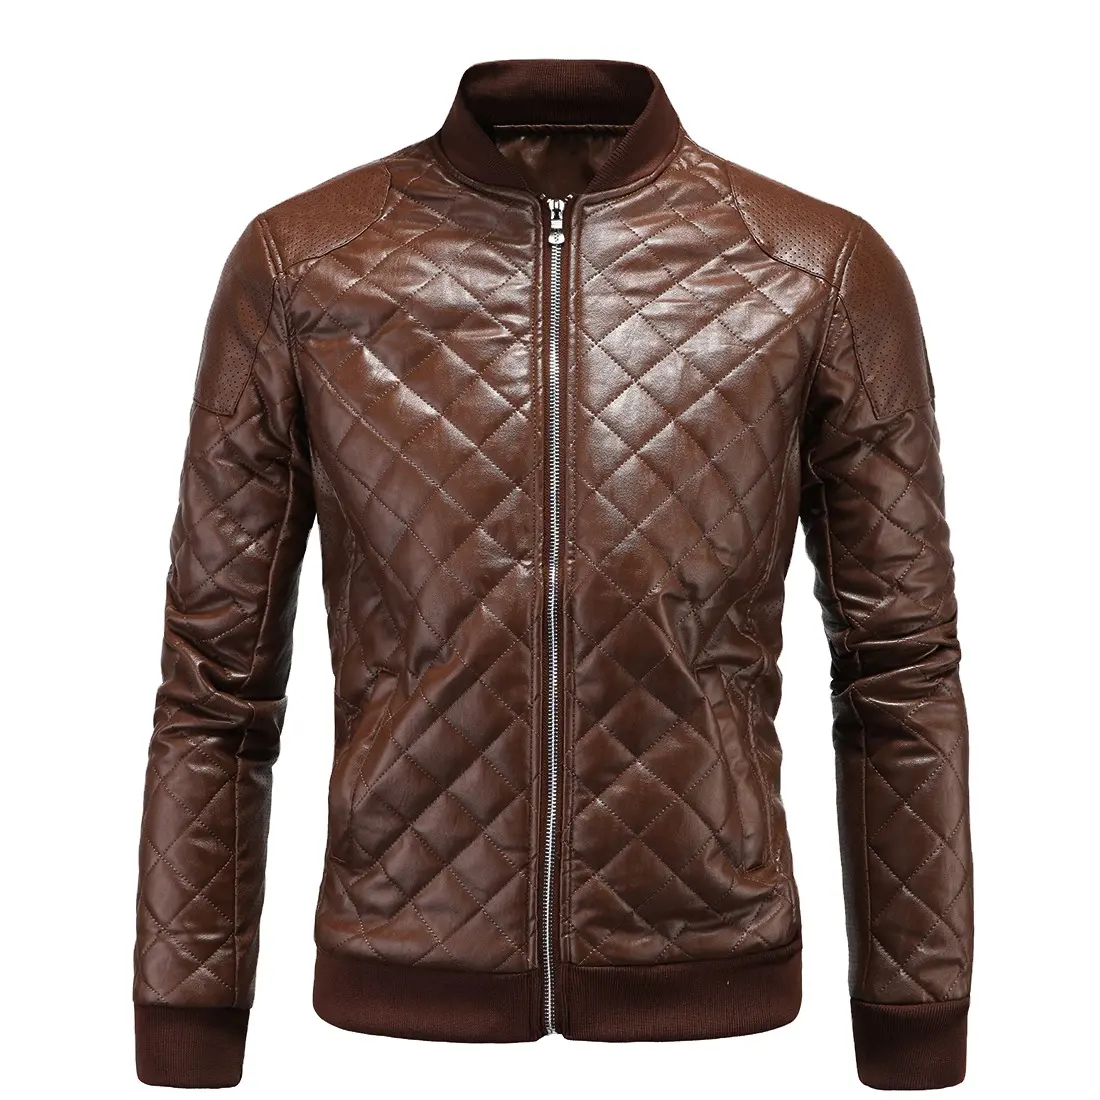 Top High Quality Leather Jacket Premium Quality for men with Original shine Cow hide Leather with fashion design